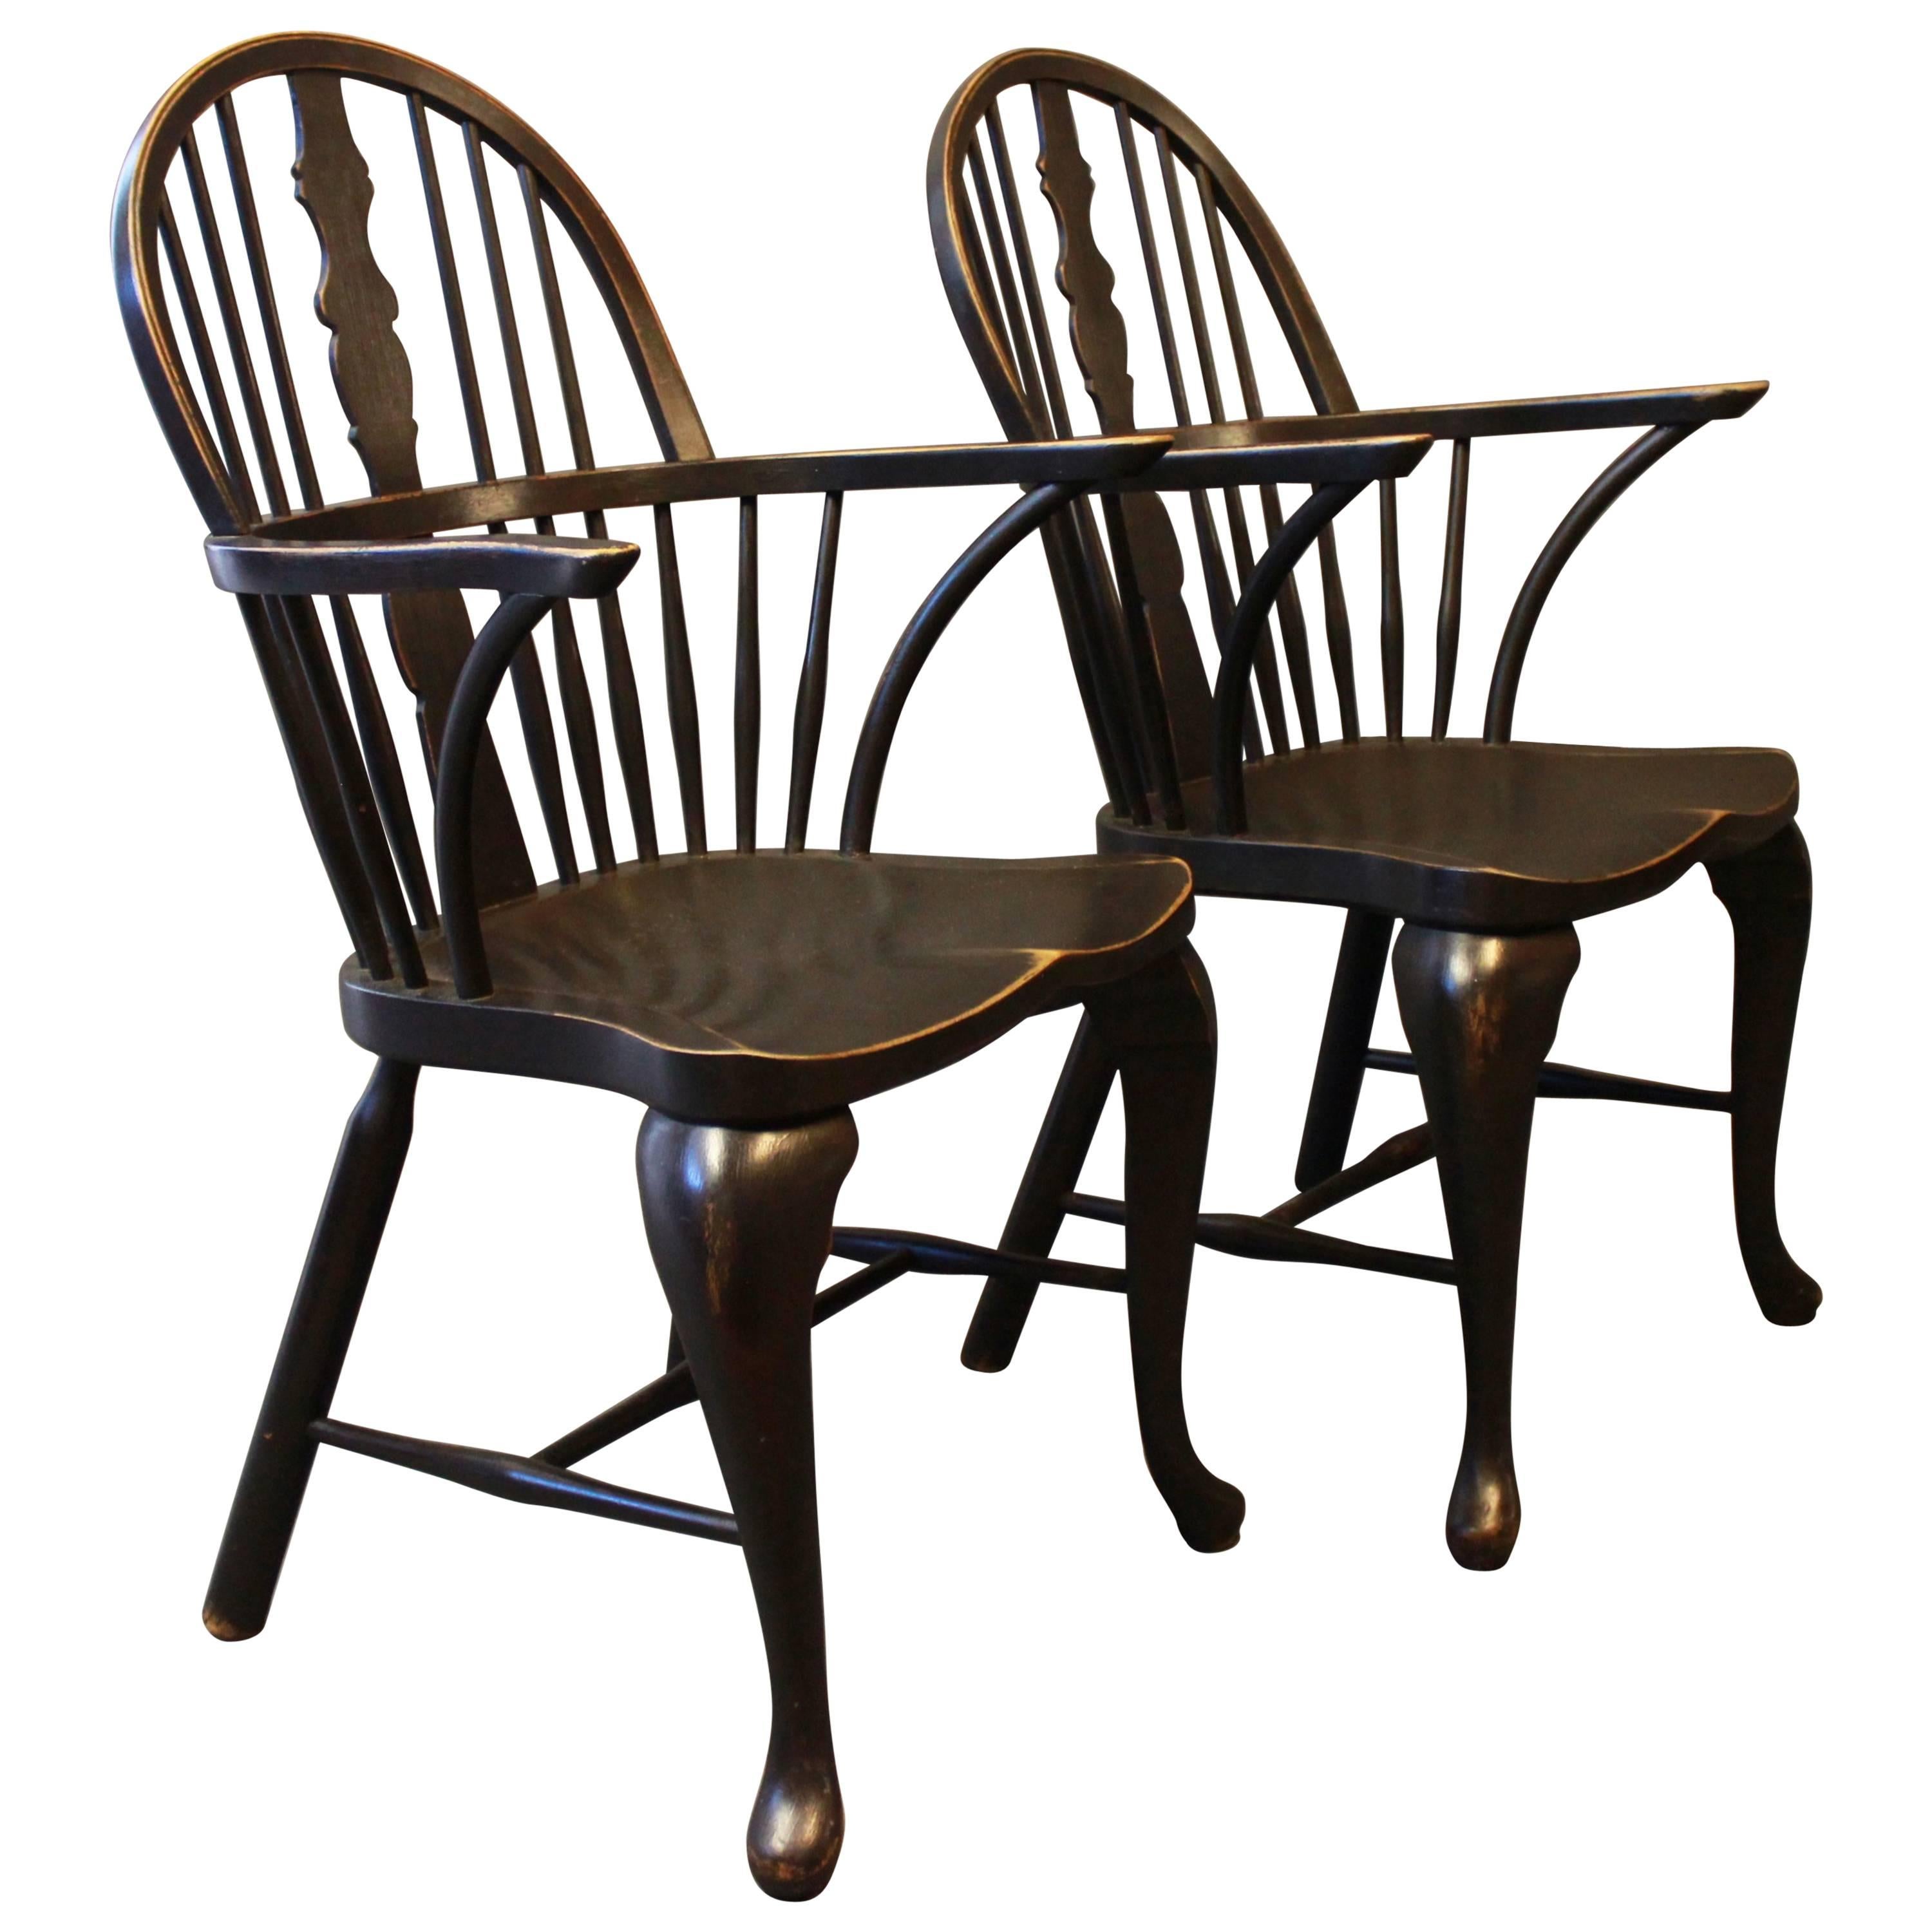 Pair of Black Painted Windsor Armchairs in Wood from the 1880s